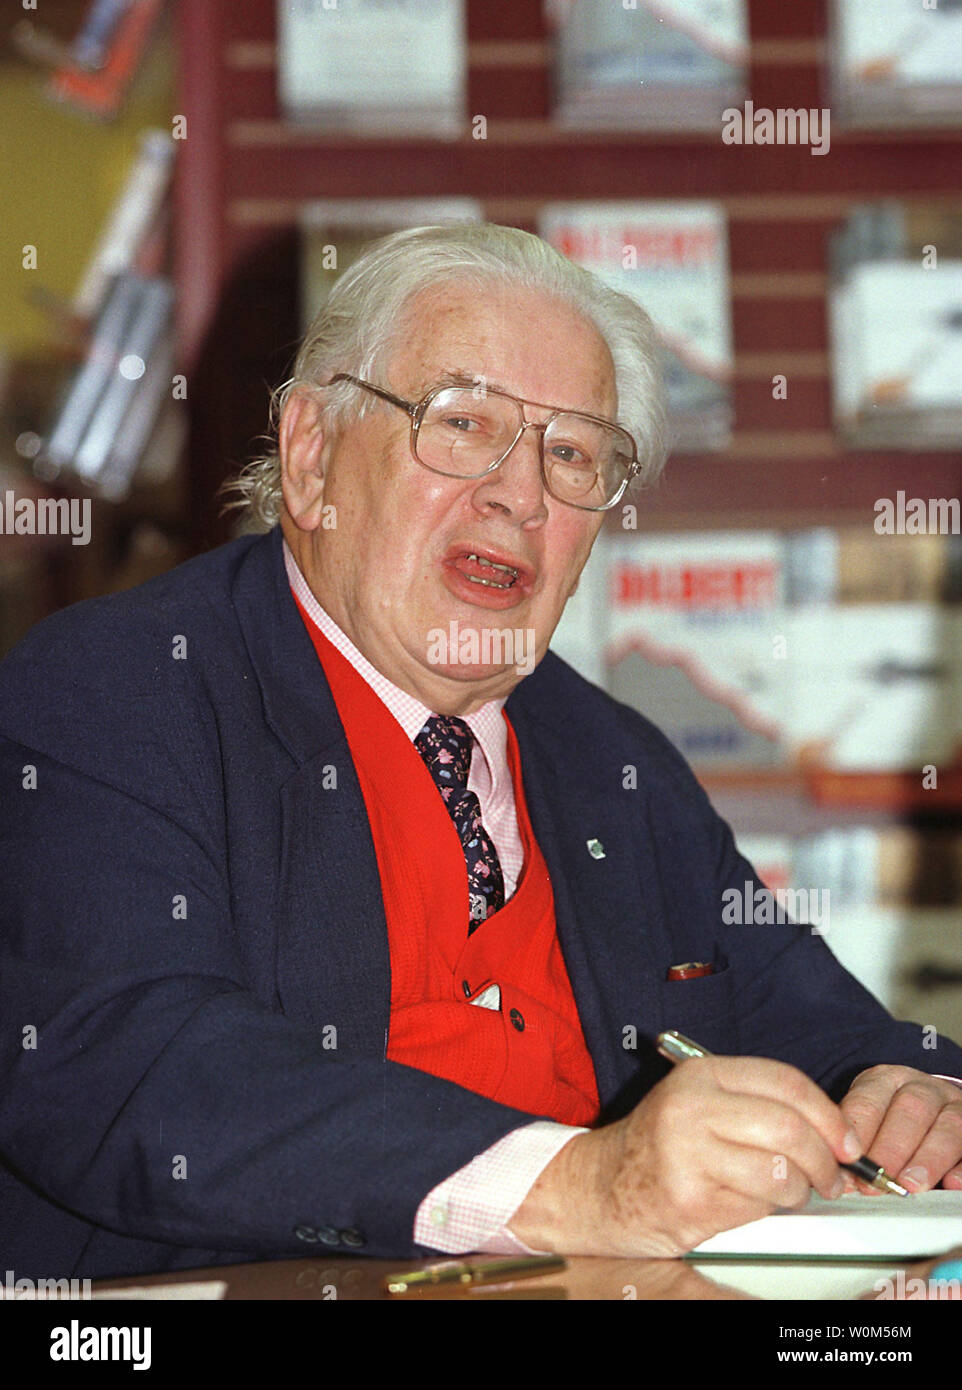 Oscar-winning British actor and playwright Peter Ustinov has died at the age of 82. He is pictured at a signing for his book 'The Quotable Ustinov' on October 12, 1996, in Vancouver. Ustinov died of heart failure in a clinic near his home on the shores of Lake Geneva on March 28, 2004 according to family members.   (UPI Photo/H. Ruckemann/FILE) Stock Photo